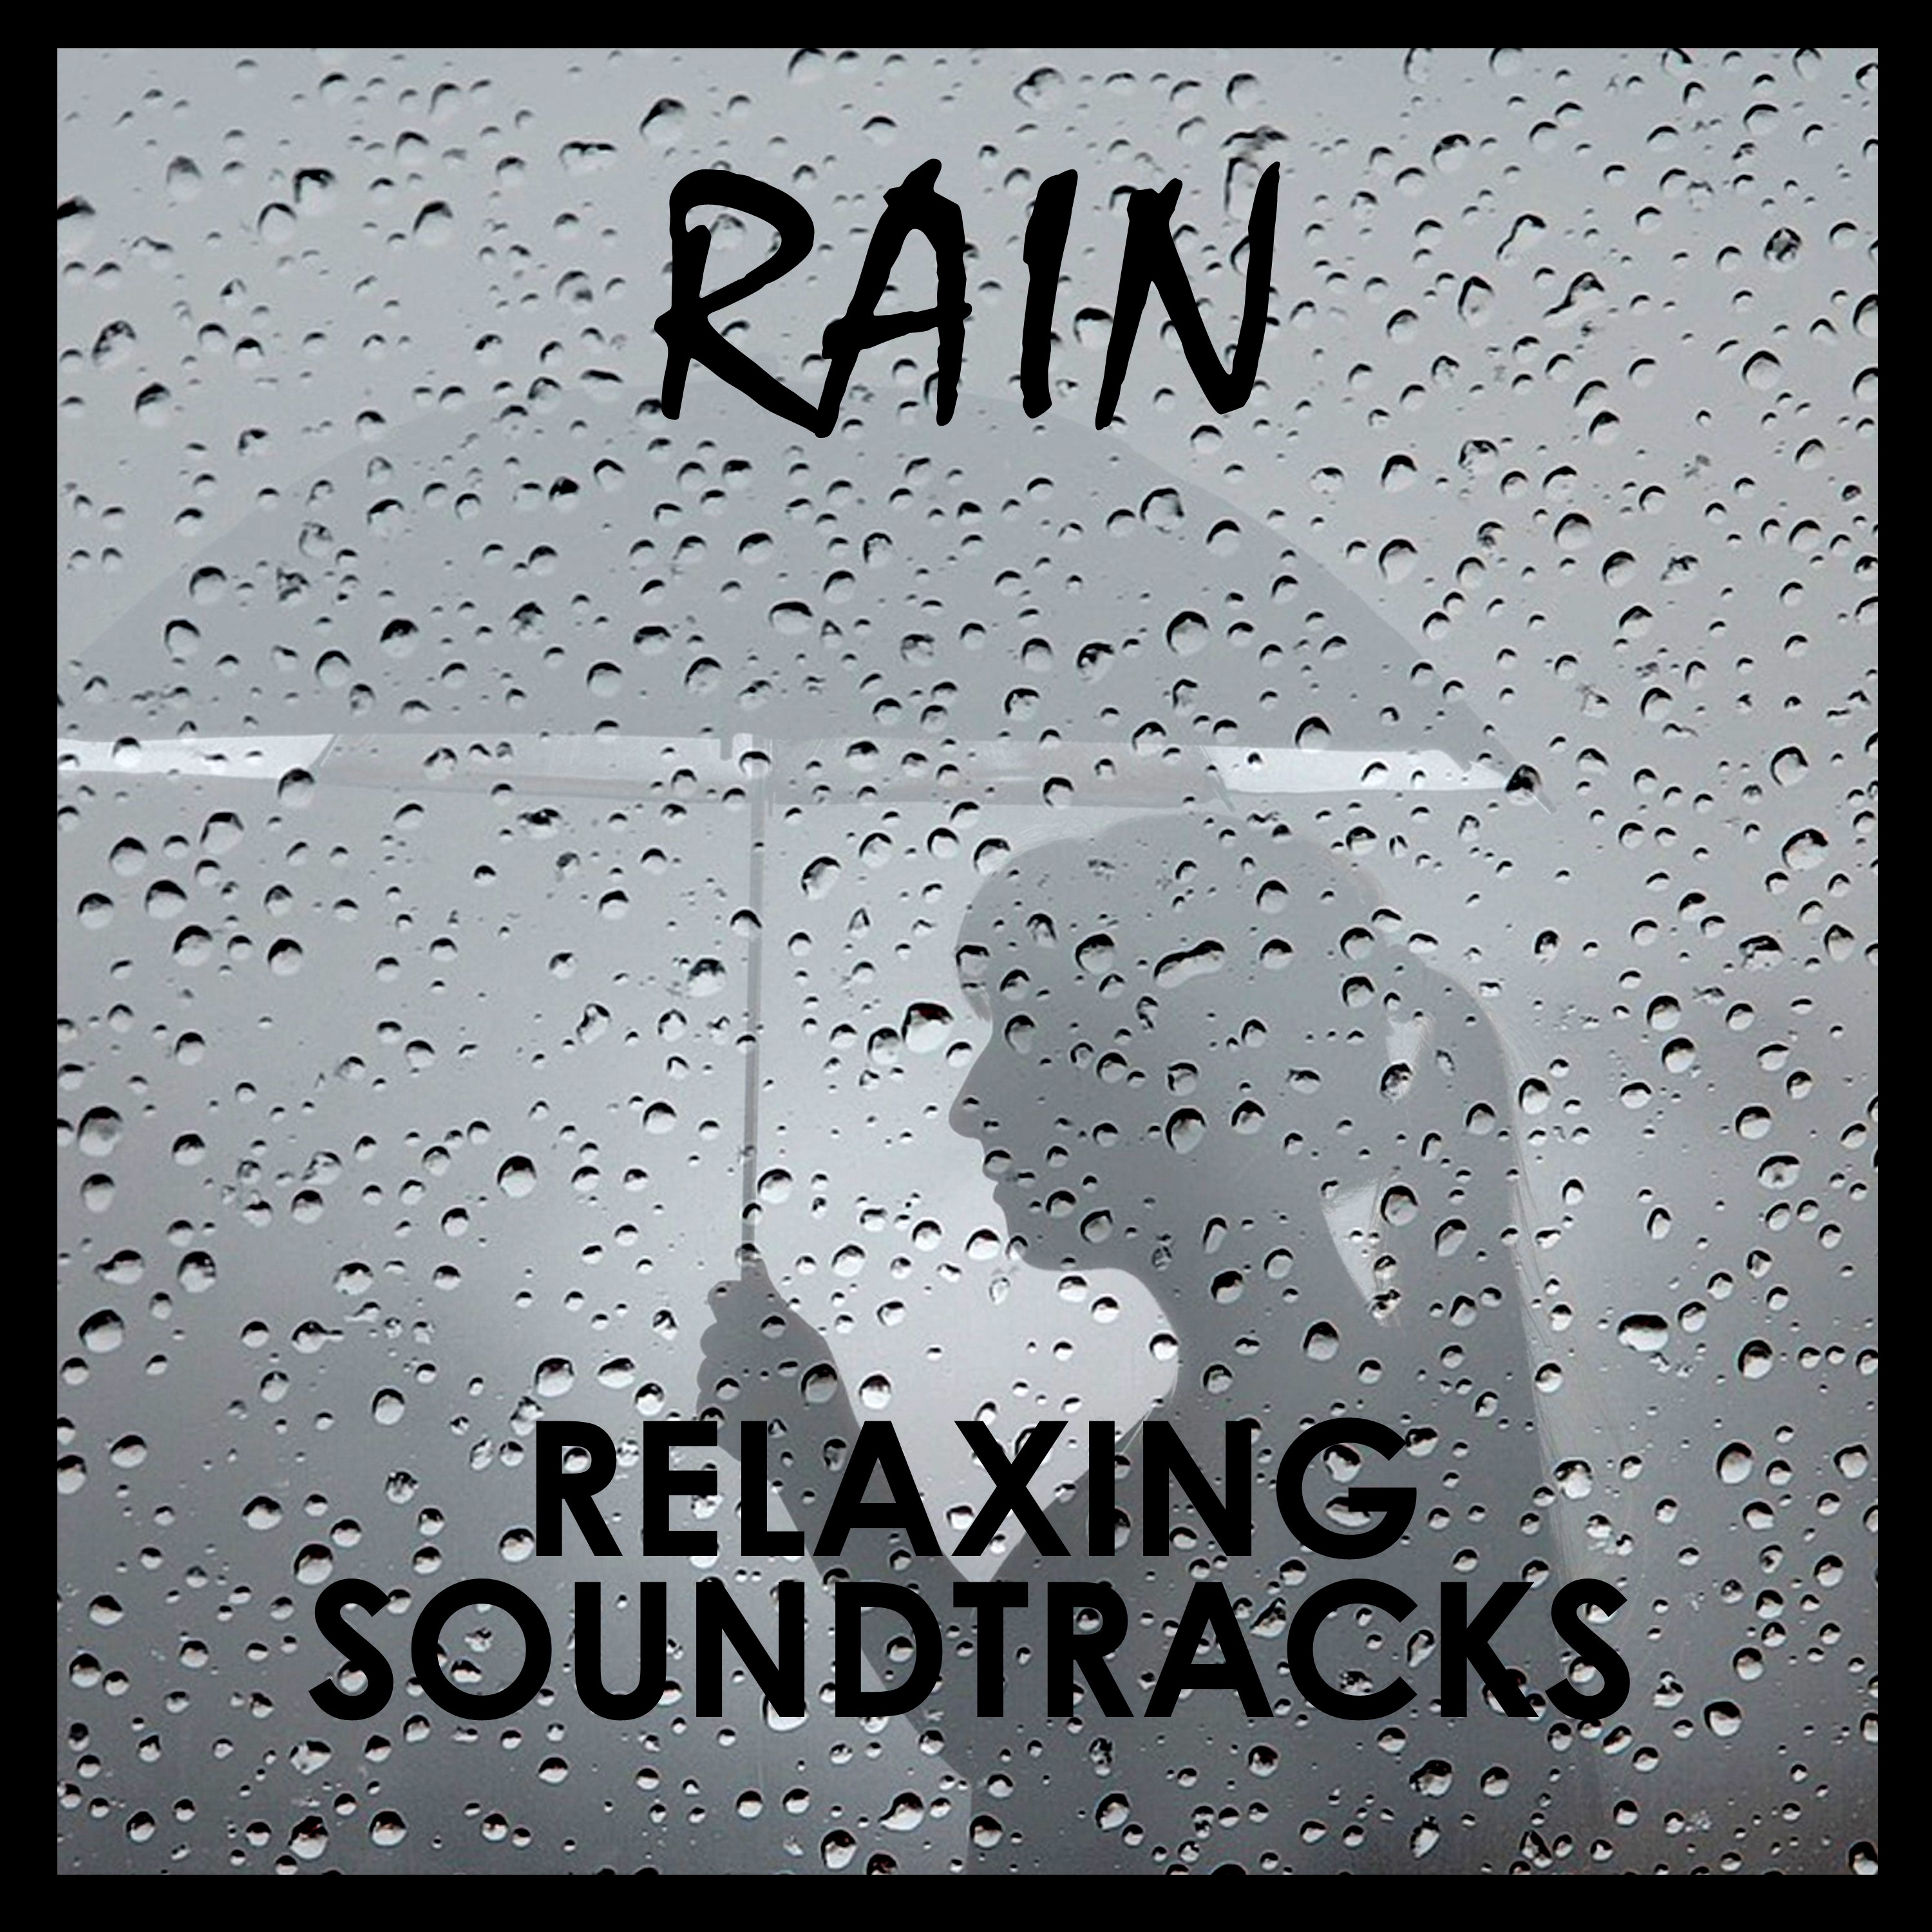 #21 Yoga Assisting Rain Sounds - Natural Background for Achieving Relaxation or Sleep